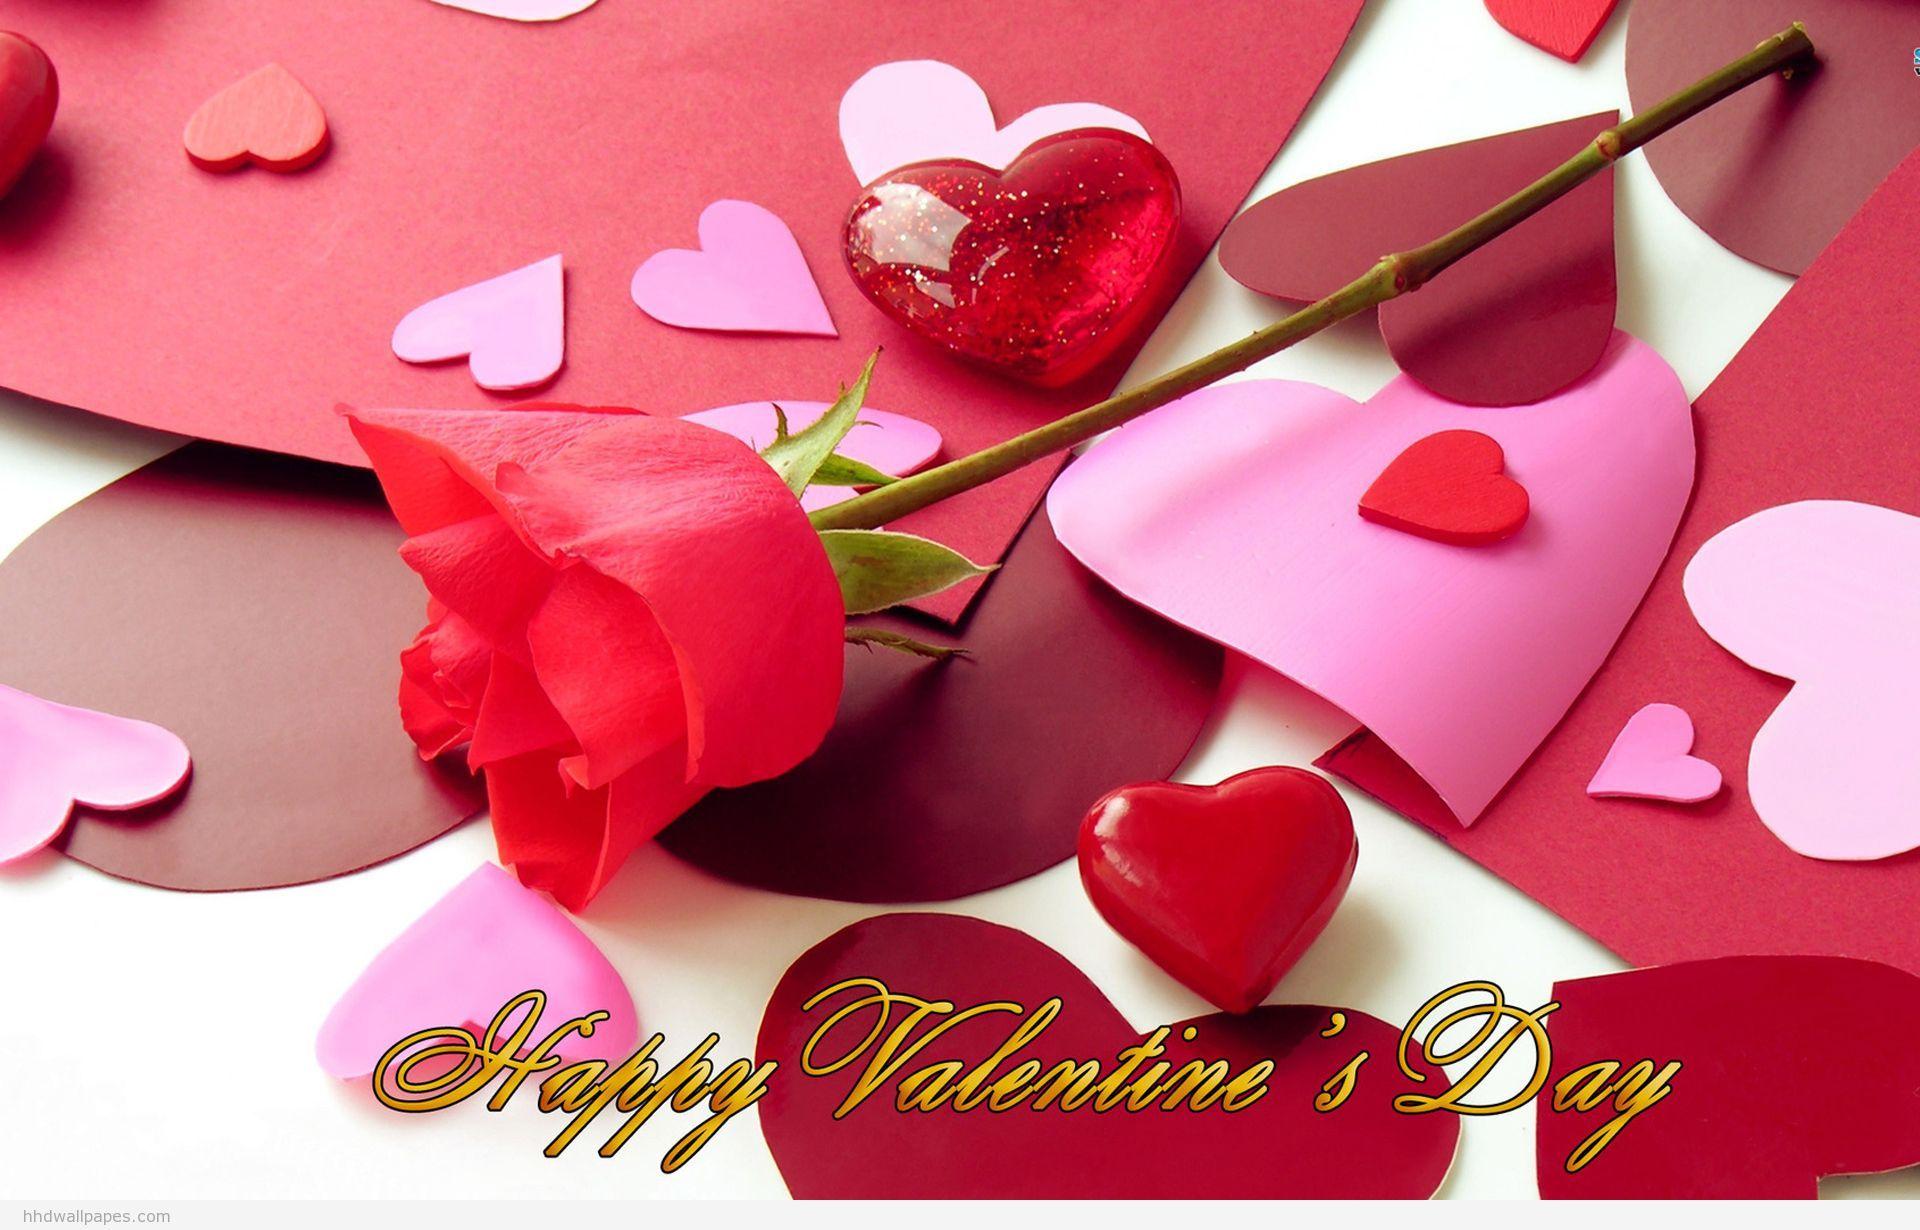 VALENTINE DAY - 14 FEBRUARY : IMAGES, GIF, ANIMATED GIF, WALLPAPER, STICKER  FOR WHATSAPP & FACEBOOK 